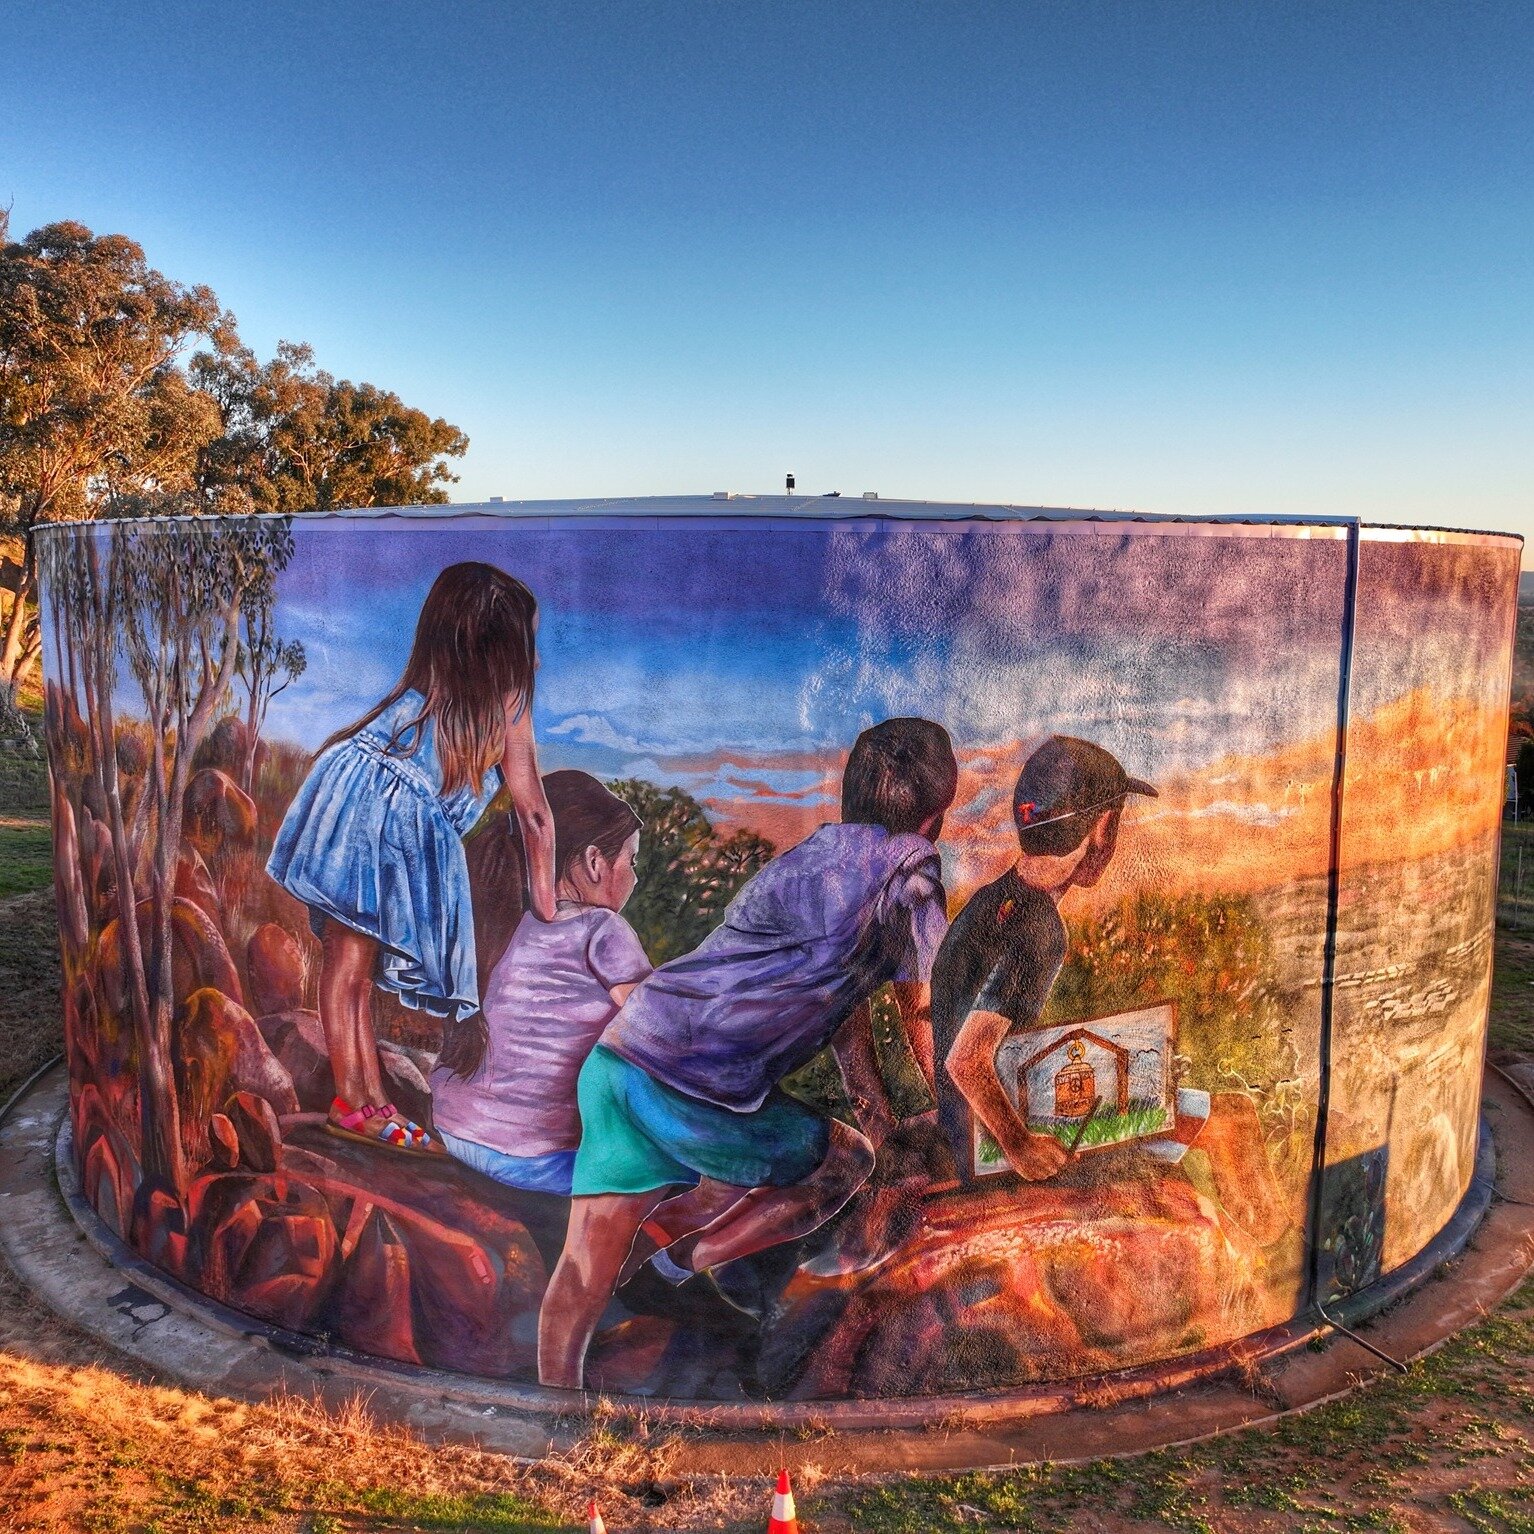 COWRA ARTS 🎨🖌️

Well know for our war history, Cowra is also home to beautiful works of art. 

💦 Newly completed, two water tanks sit atop the hill overlooking the former Cowra Prisoner of War Camp. One tank features Wiradjuri youth and the other 